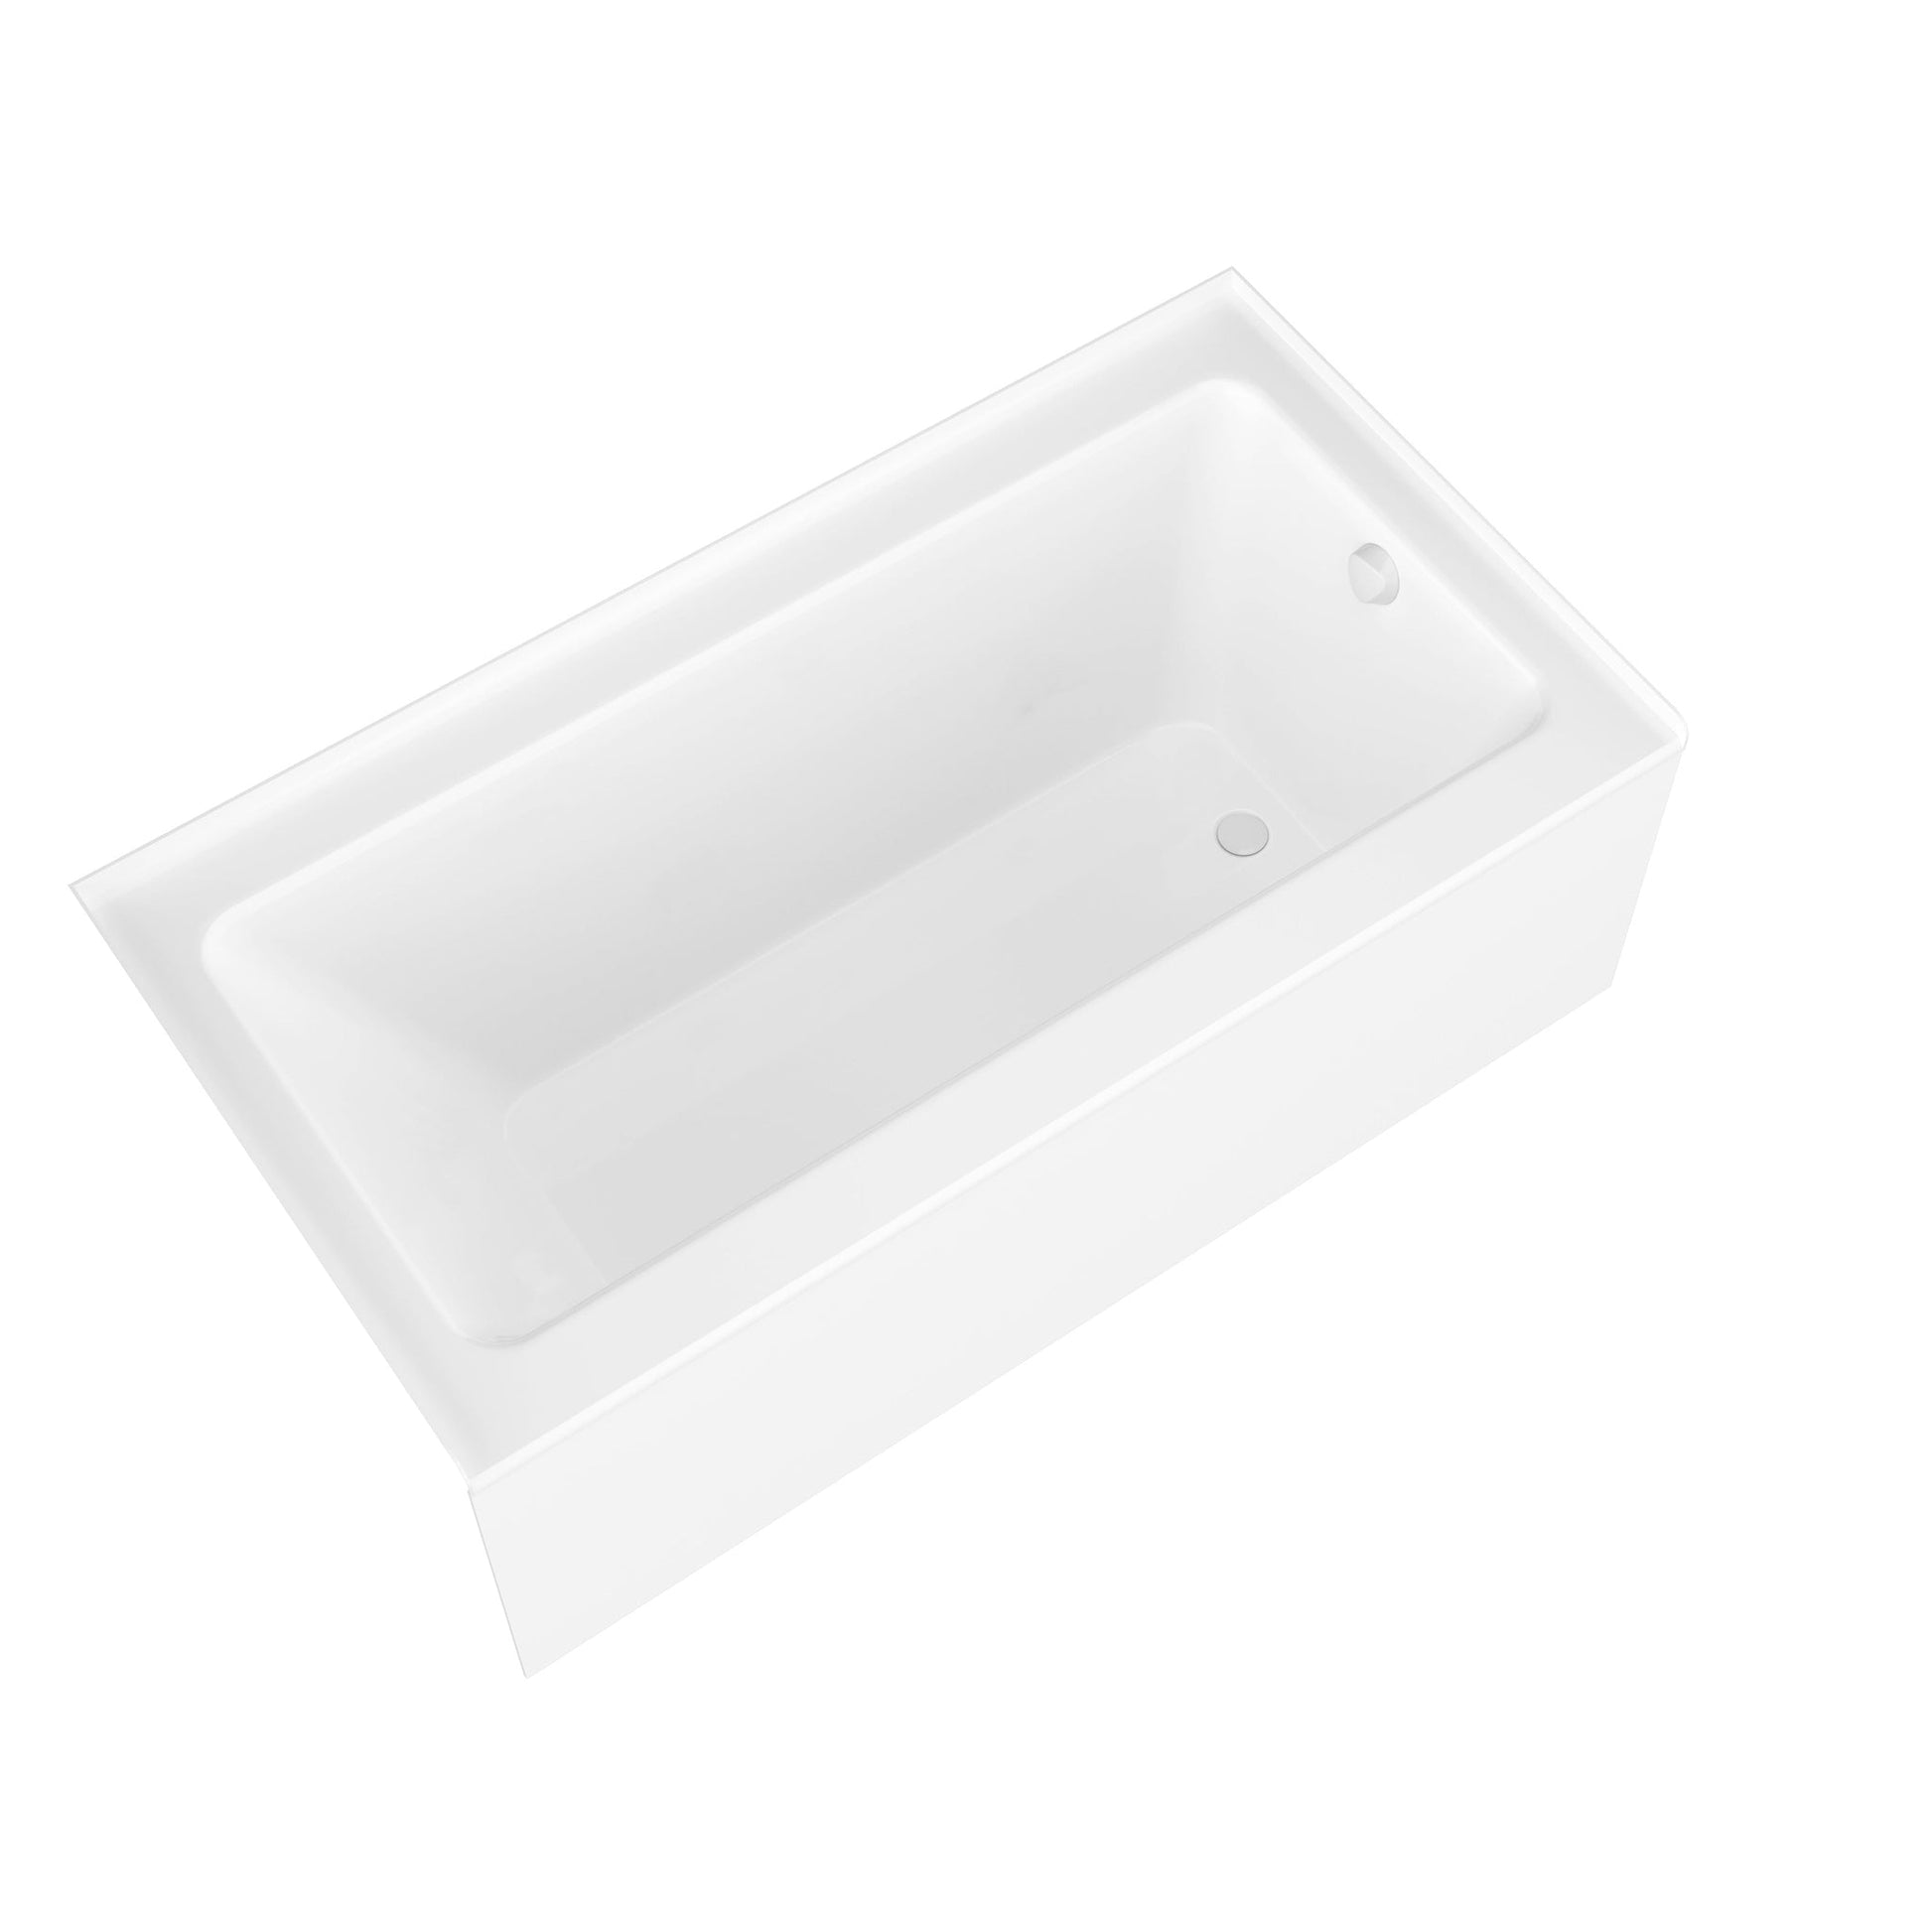 ANZZI Myth Series White "60 x 30" Alcove Right Drain Rectangular Bathtub With Built-In Flange and Frameless Brushed Nickel Hinged Door